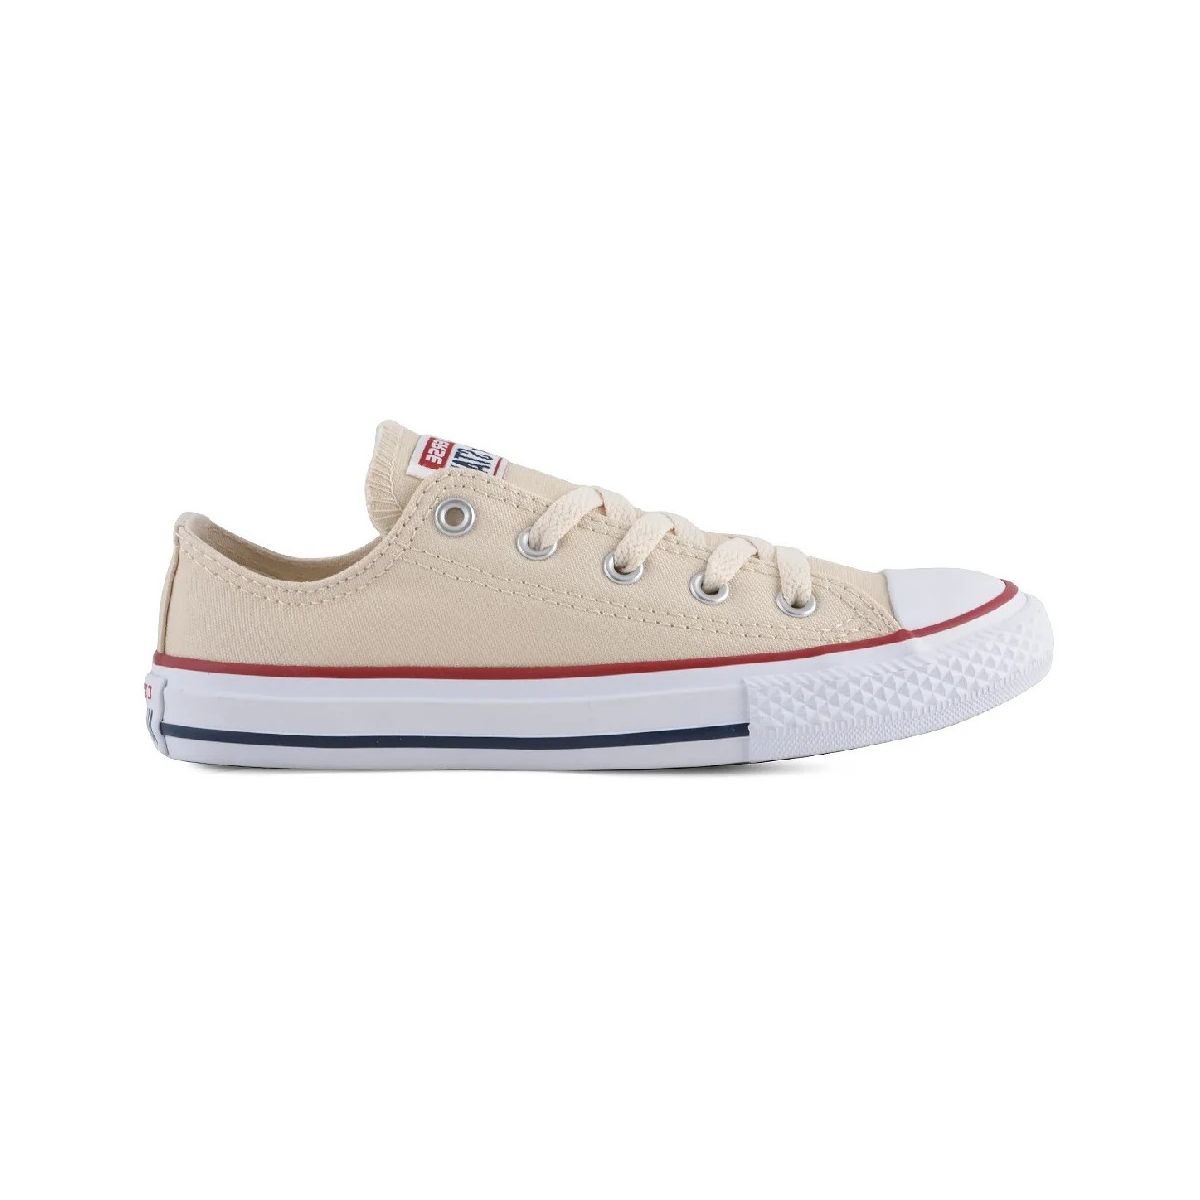 Converse All Star Chuck Tailor OX Kid's Shoes 359485C